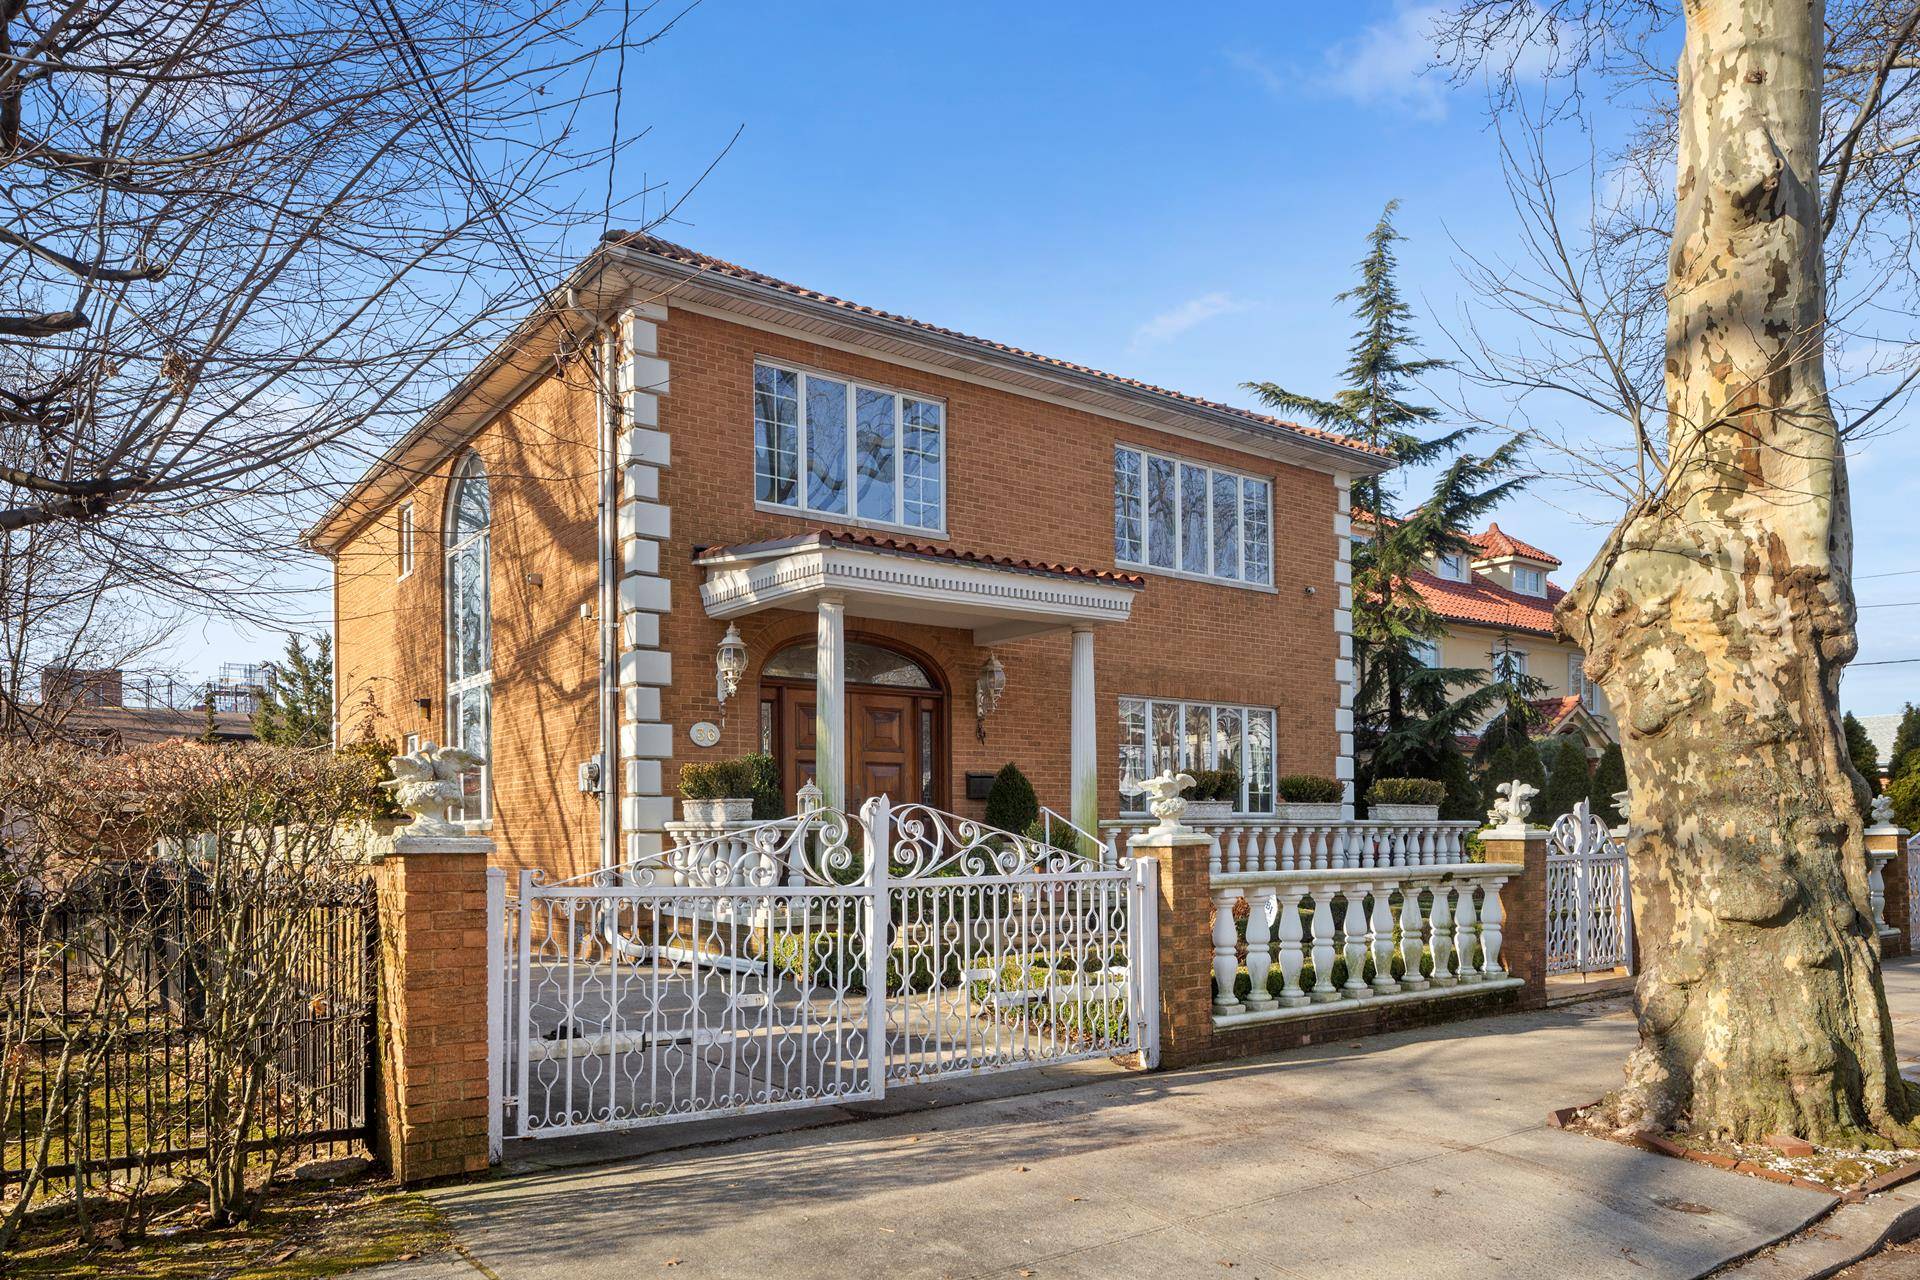 PRIME LOCATION on a very rare lot in highly desirable Bay Ridge.